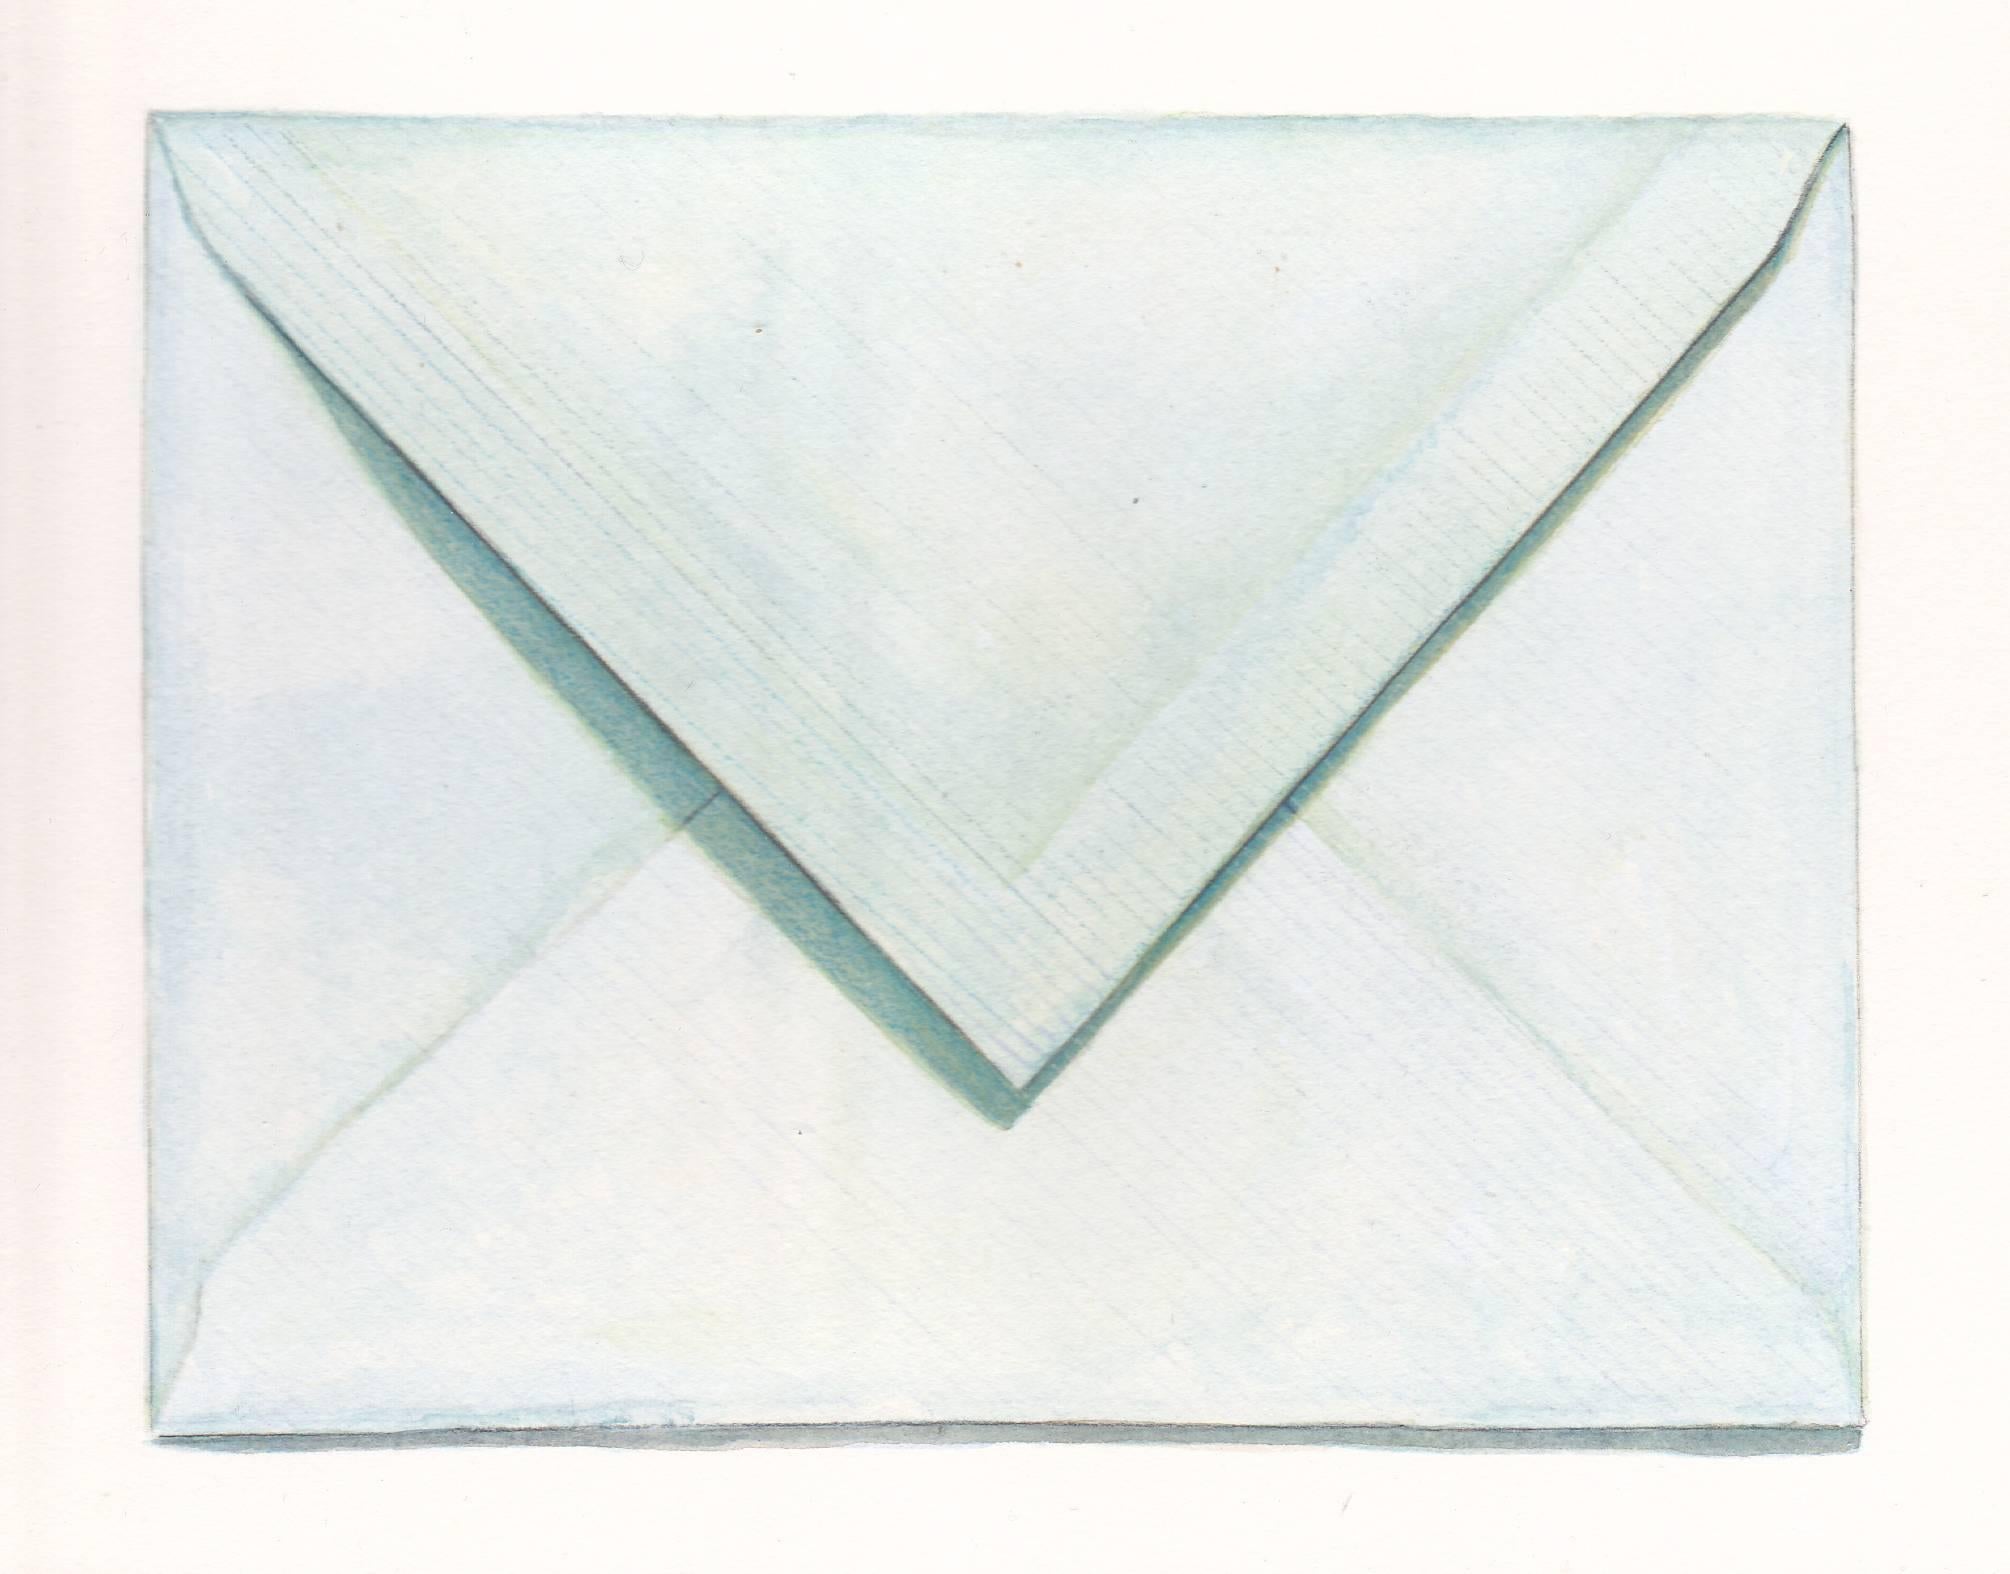 Margot Glass explores the fragility of communication, and people’s natural drive to find narrative in even the most ordinary of objects. In her Envelopes series, Glass works in watercolor, pencil and silverpoint, using trompe l’oeil to highlight the